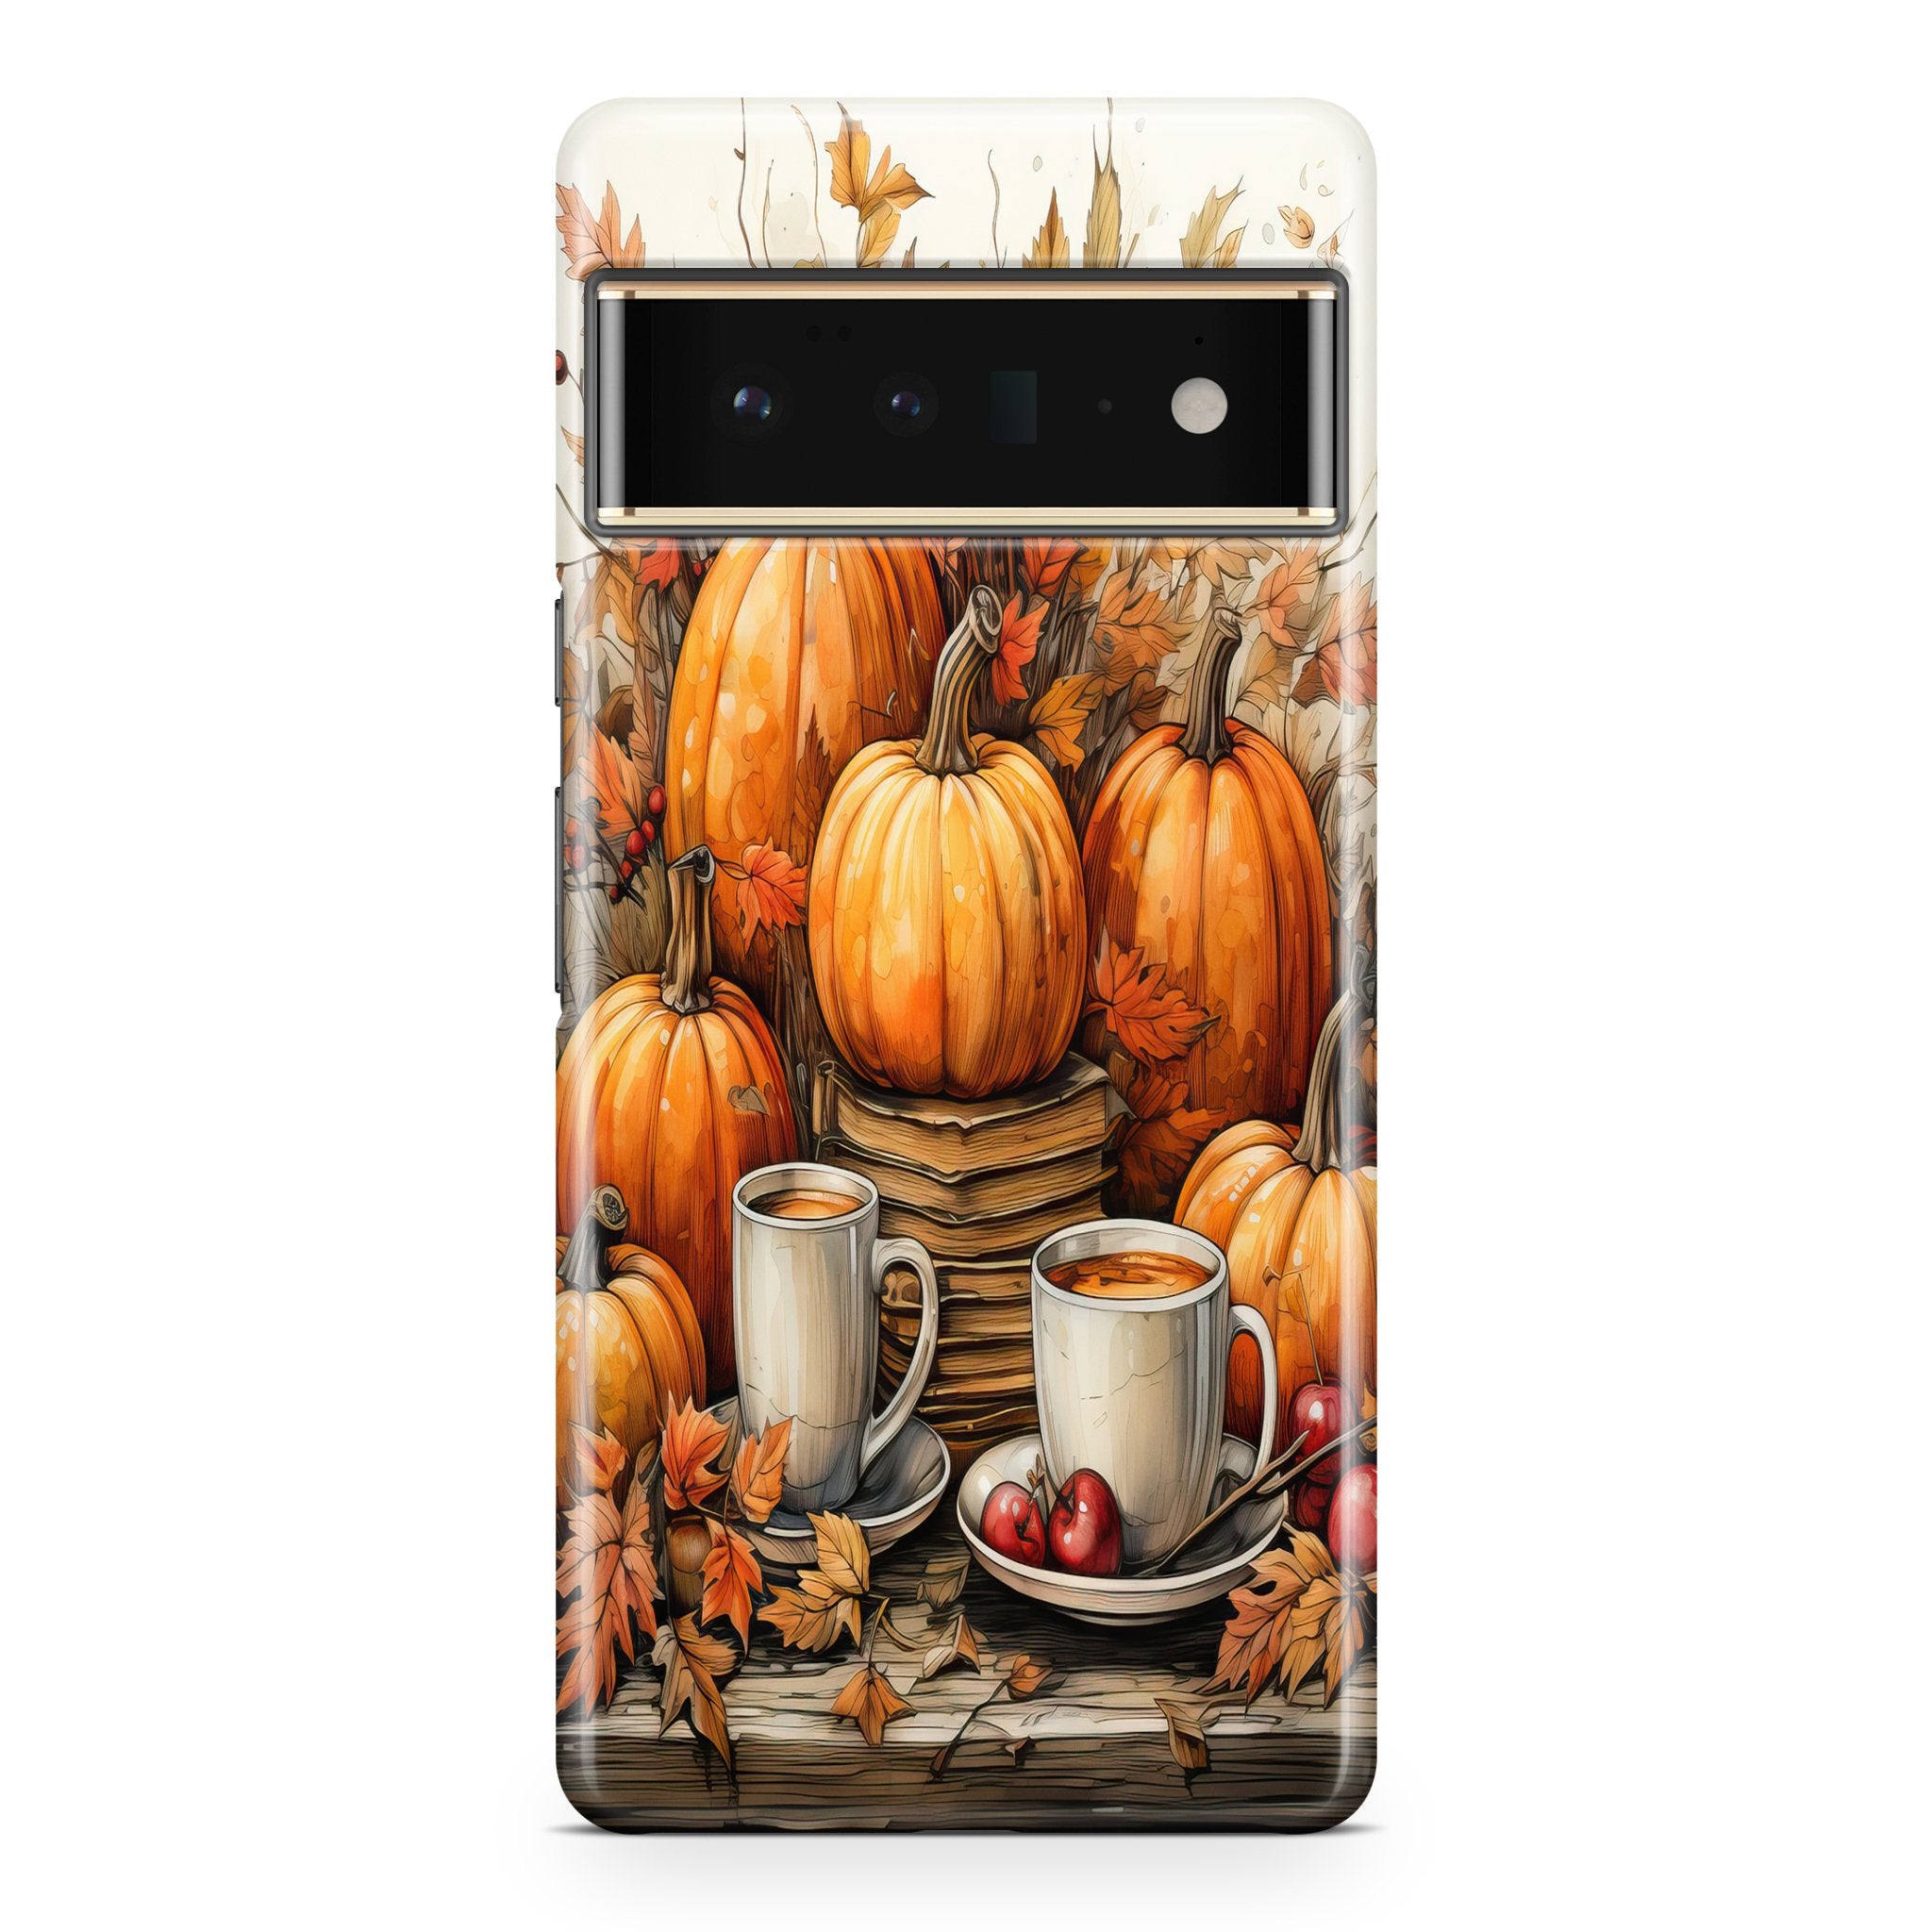 Harvest Pumpkin - Google phone case designs by CaseSwagger